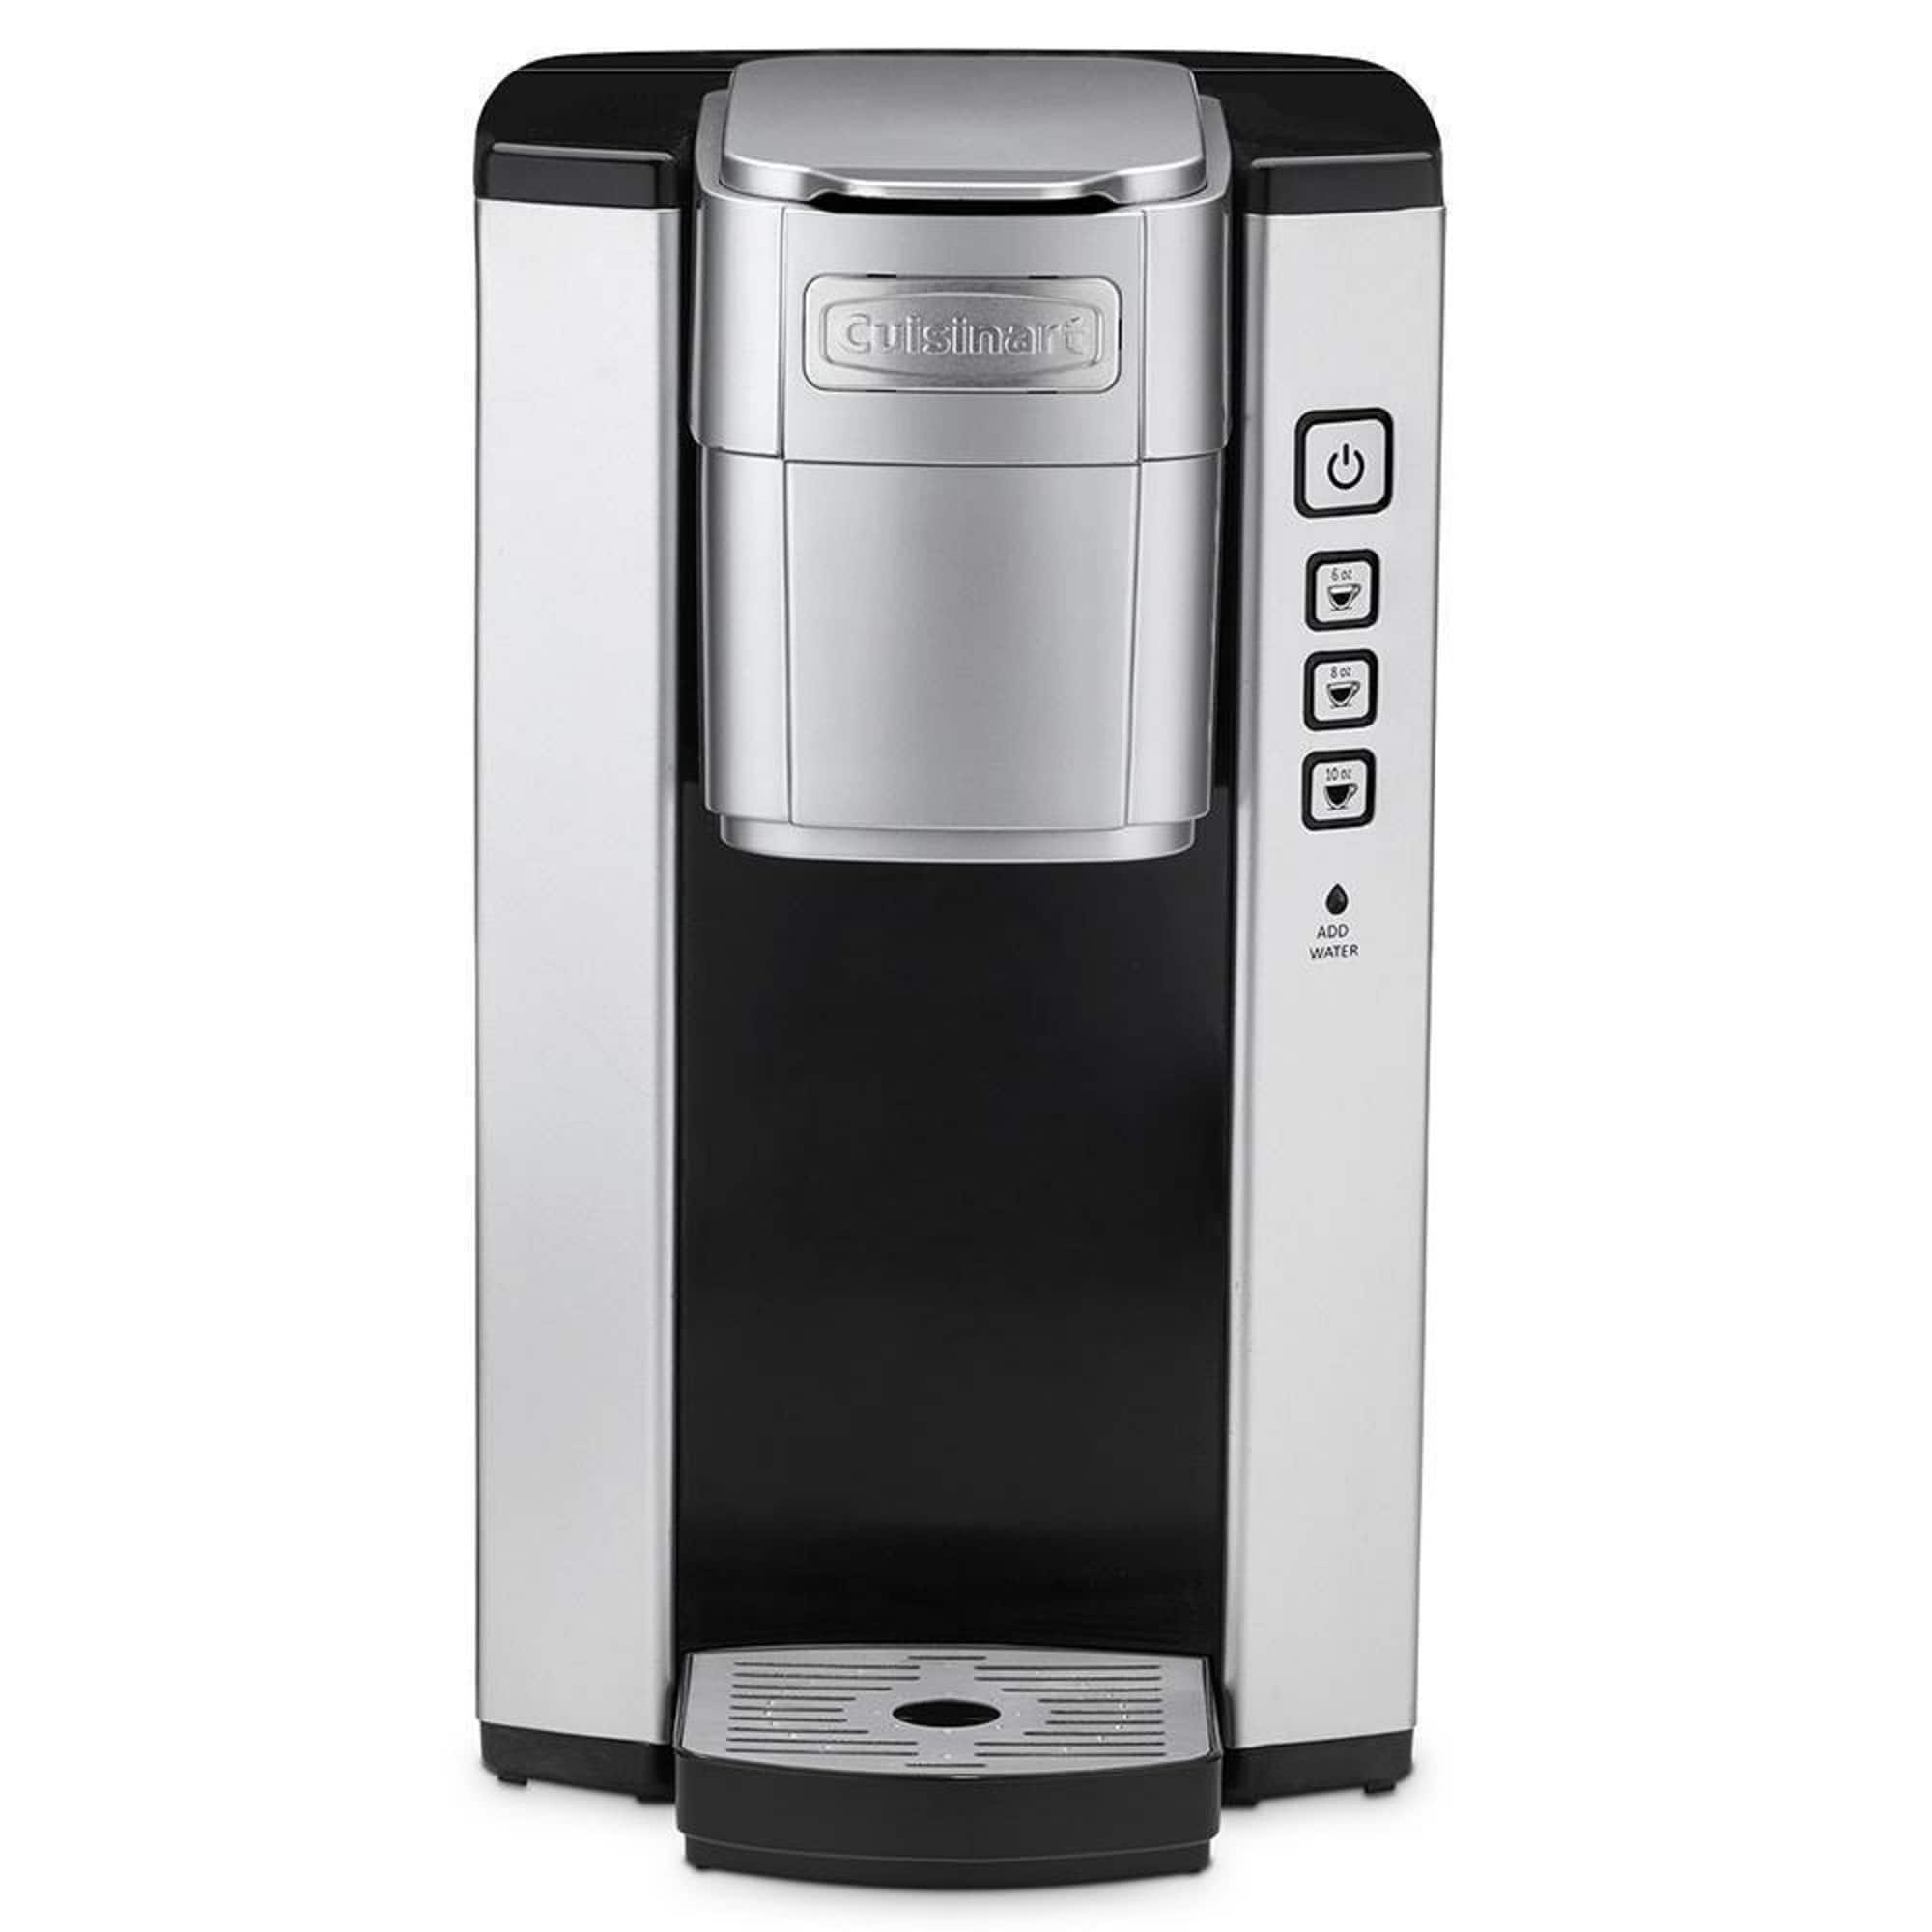 https://ak1.ostkcdn.com/images/products/is/images/direct/5d39a31ea8f237872a78f7b1d0b34dcf0795e5d3/Cuisinart-SS-5-Compact-Single-Serve-Coffee-Brewer.jpg